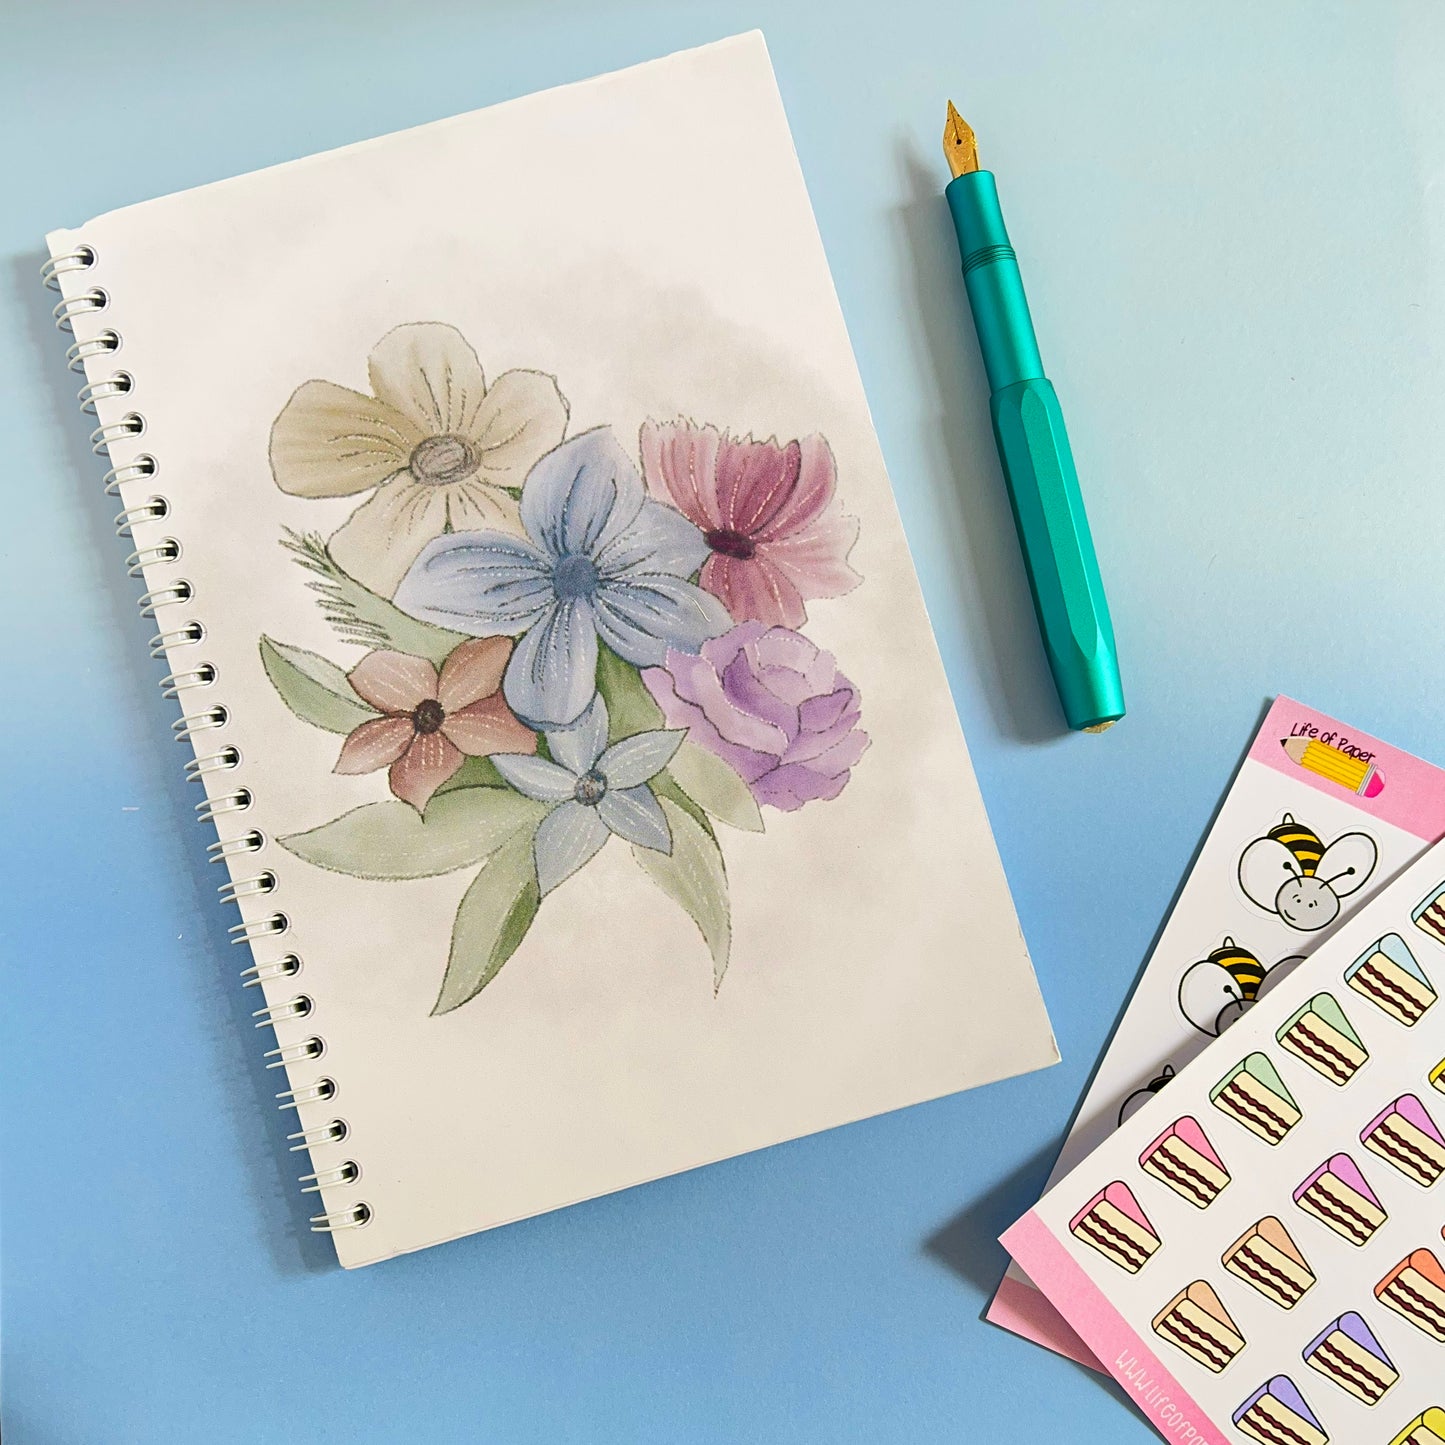 A sketchbook with a drawing of colorful flowers rests on a blue surface. Beside the sketchbook is a teal fountain pen and a sheet of stickers featuring cake slices and cartoon faces, including bears and bees. This high-quality Faded Floral Notebook adds charm to any artist's collection.